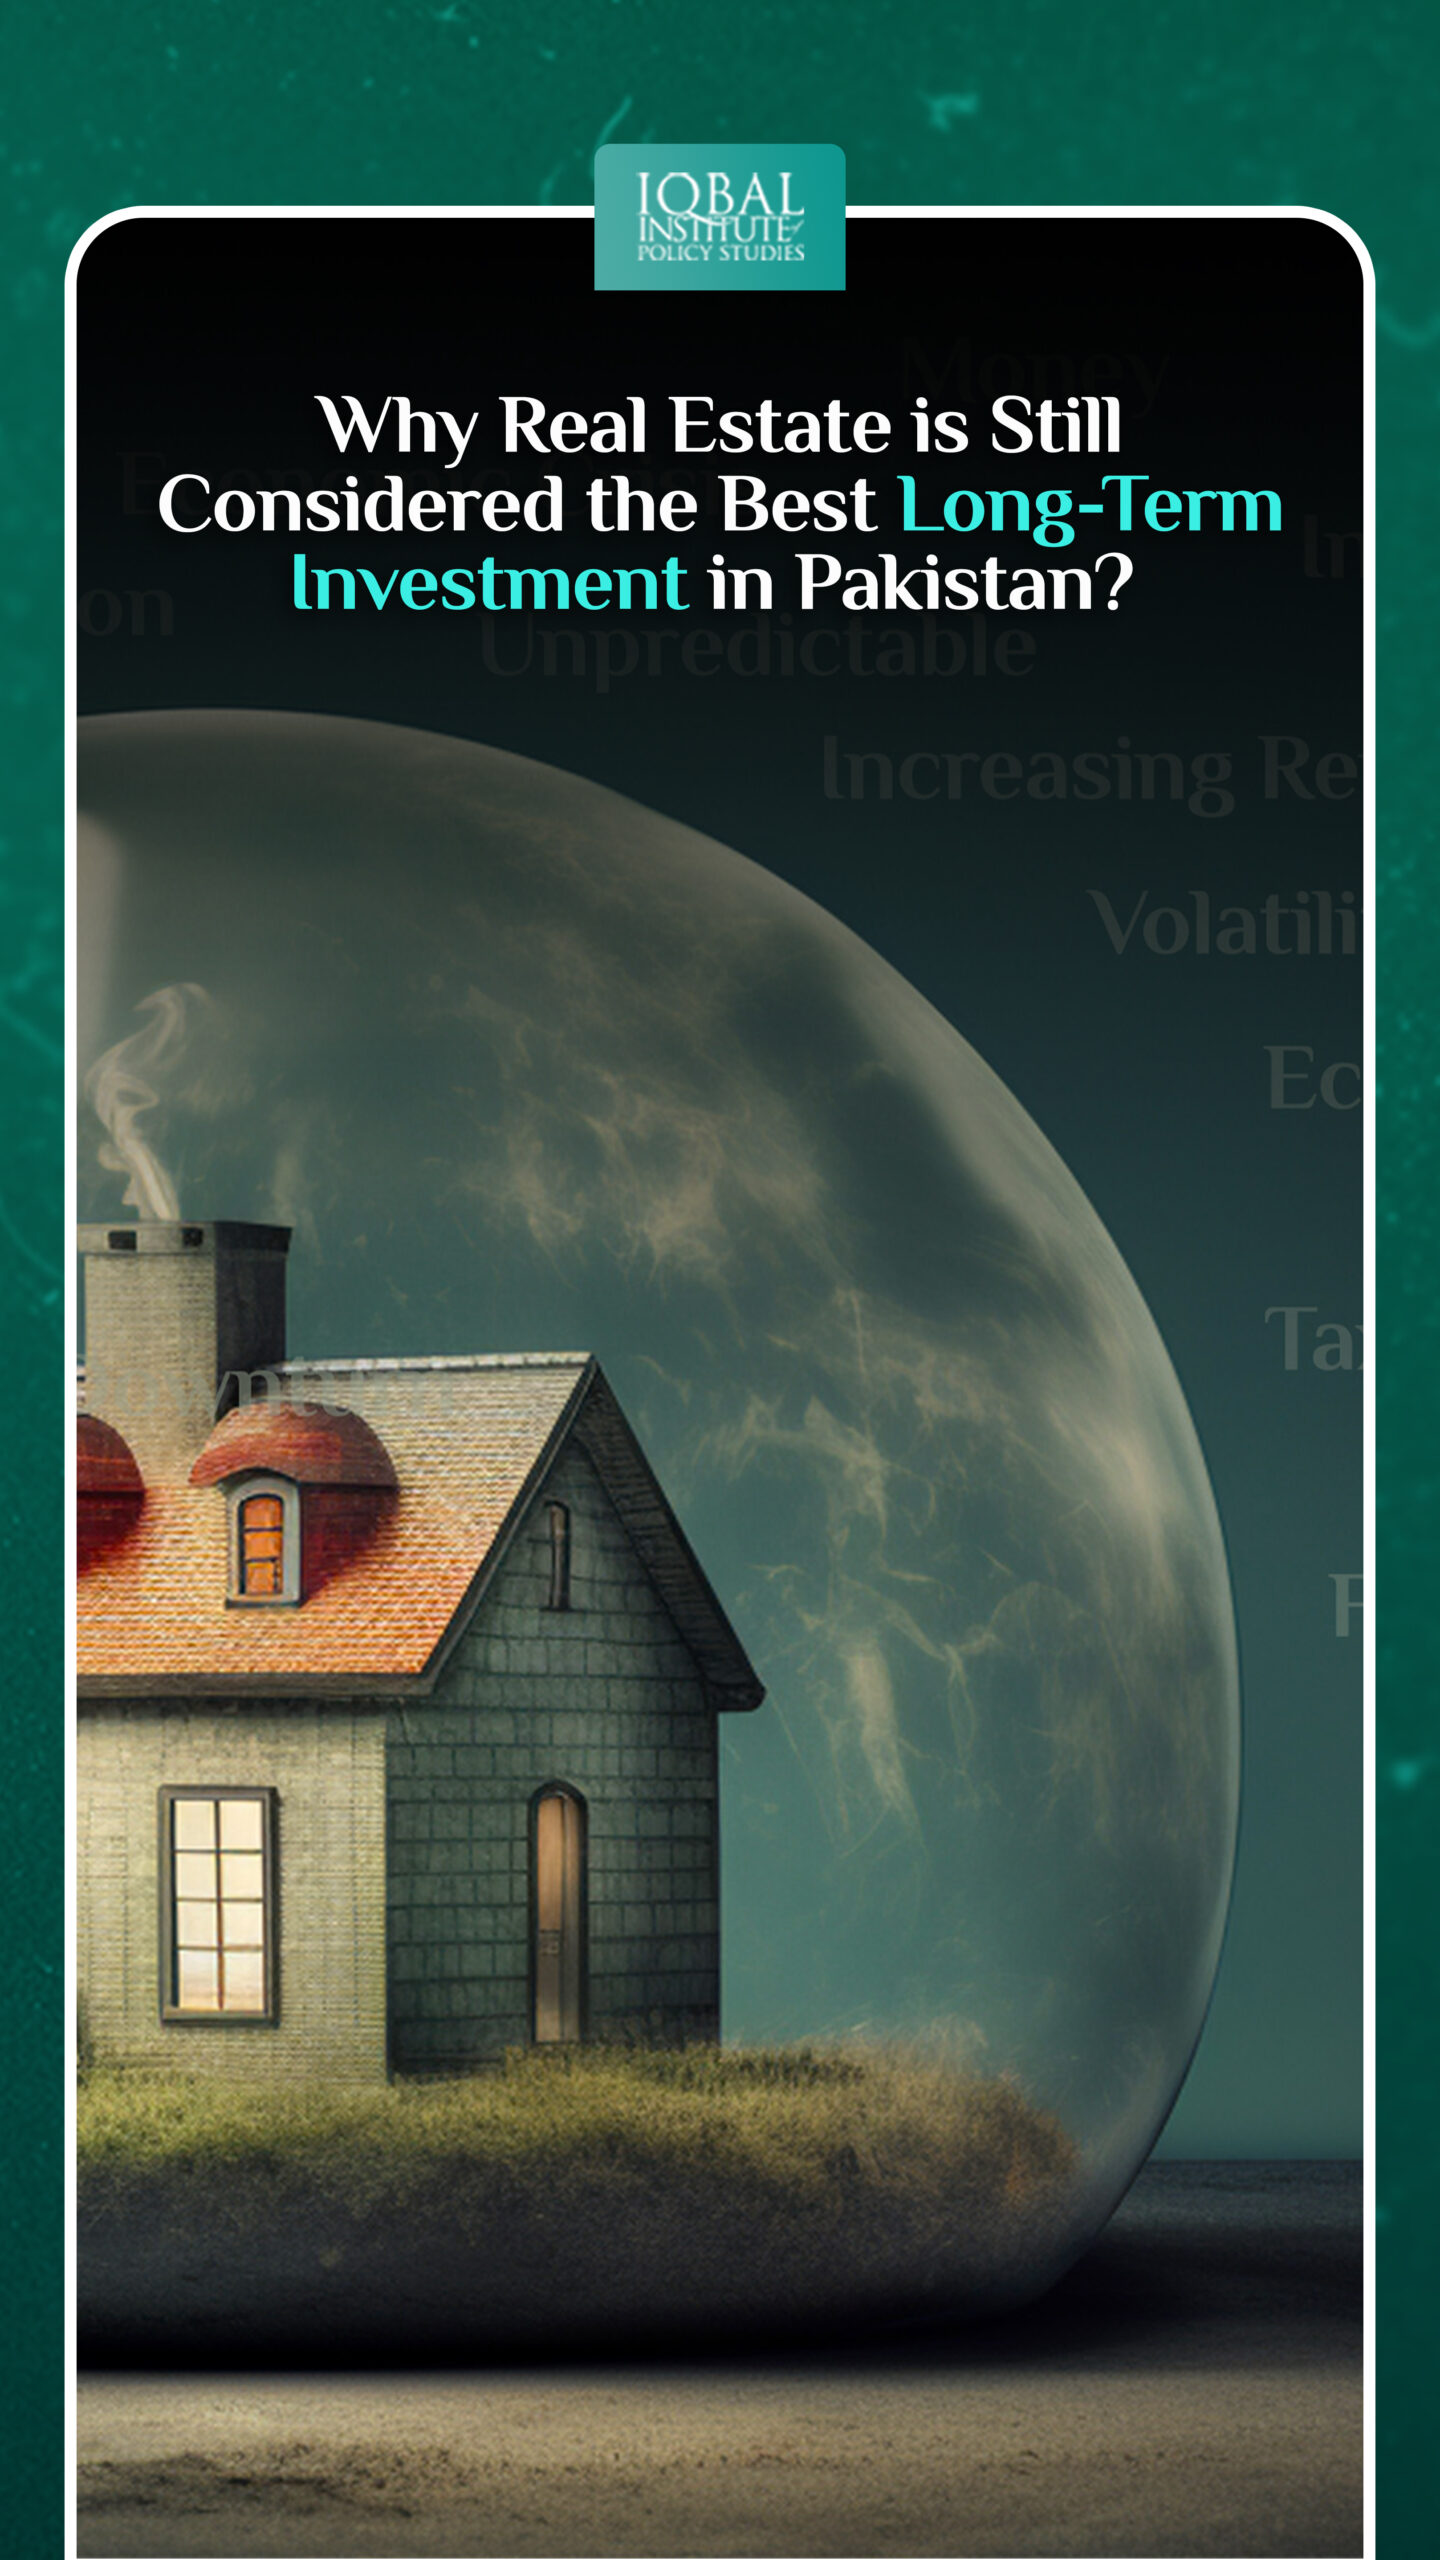 Why Real Estate Is Still Considered the Best Long-Term Investment in Pakistan?